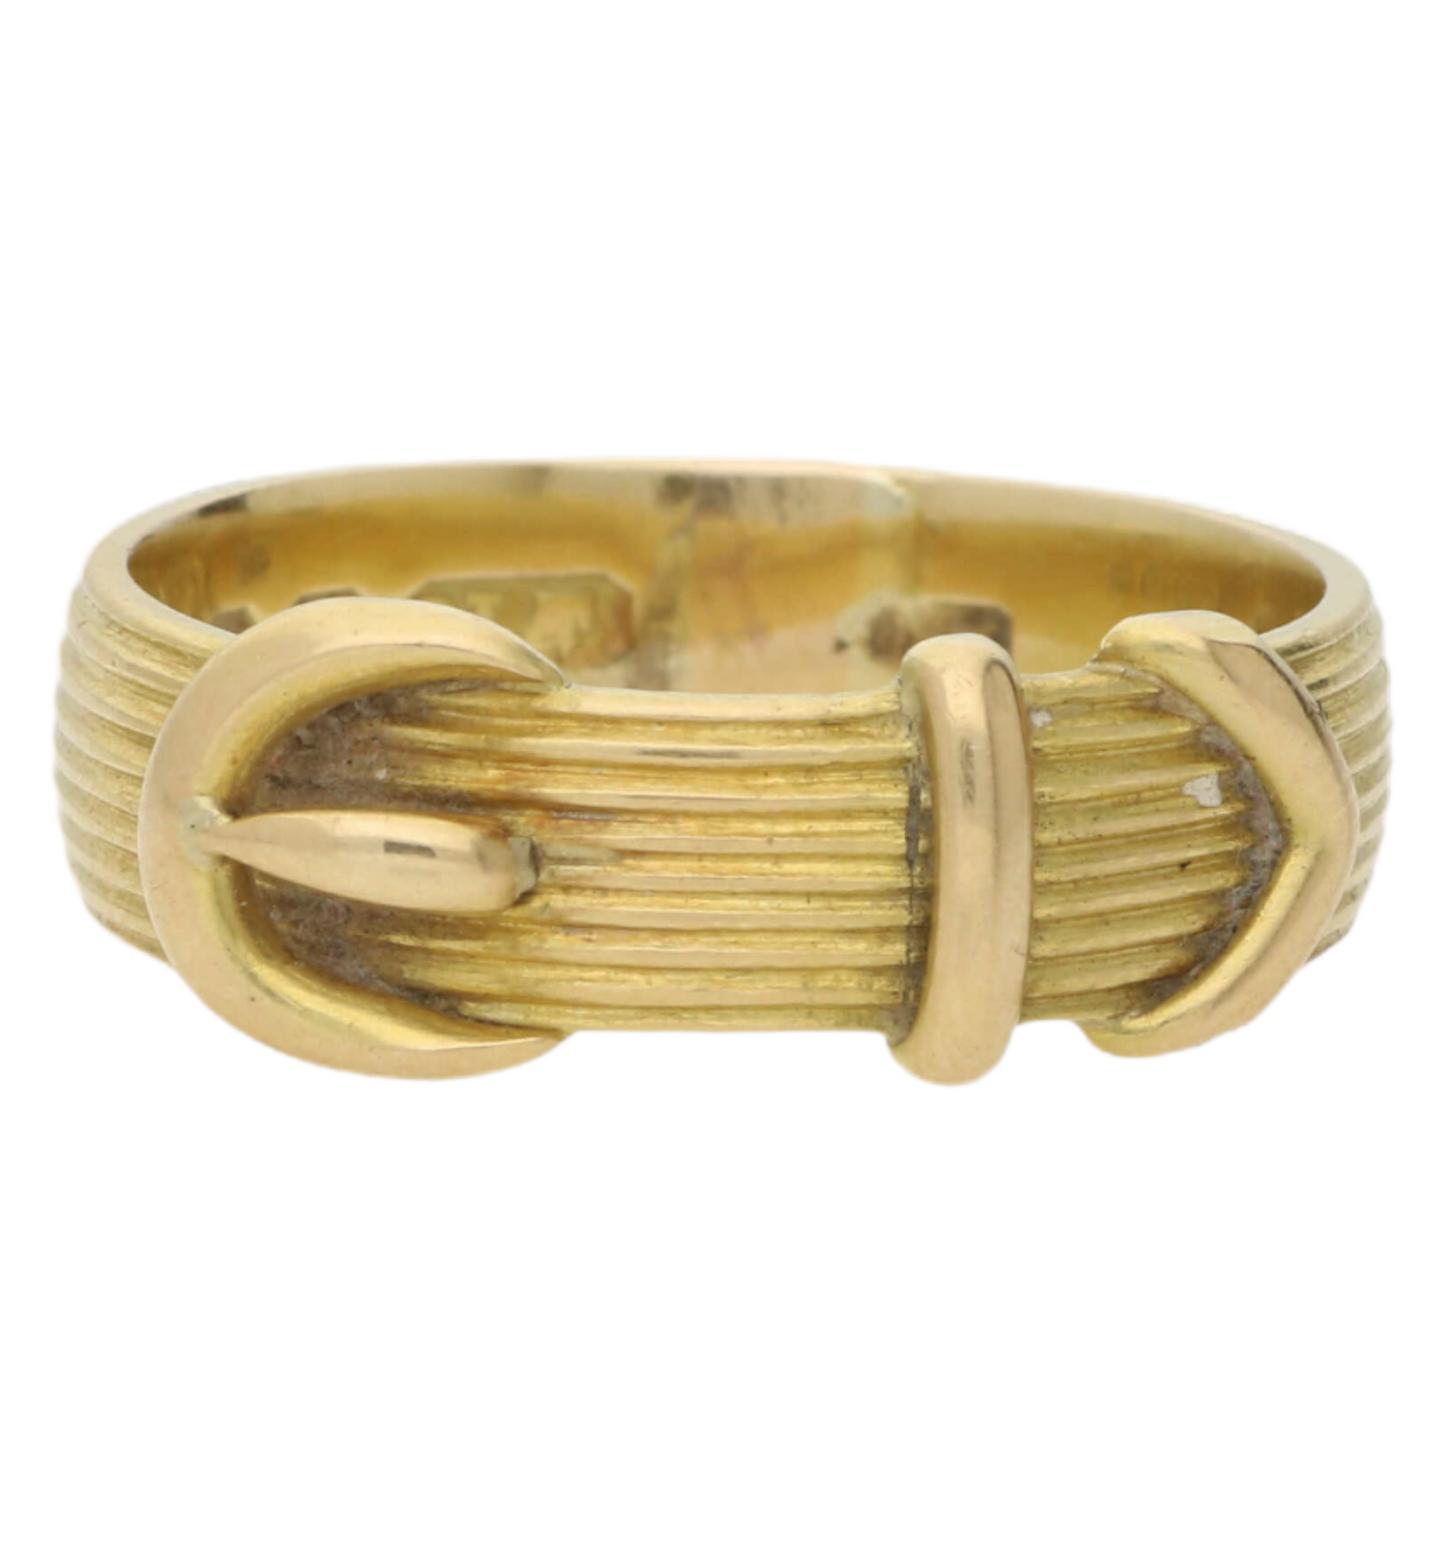 1886 18ct gold belt buckle band ring